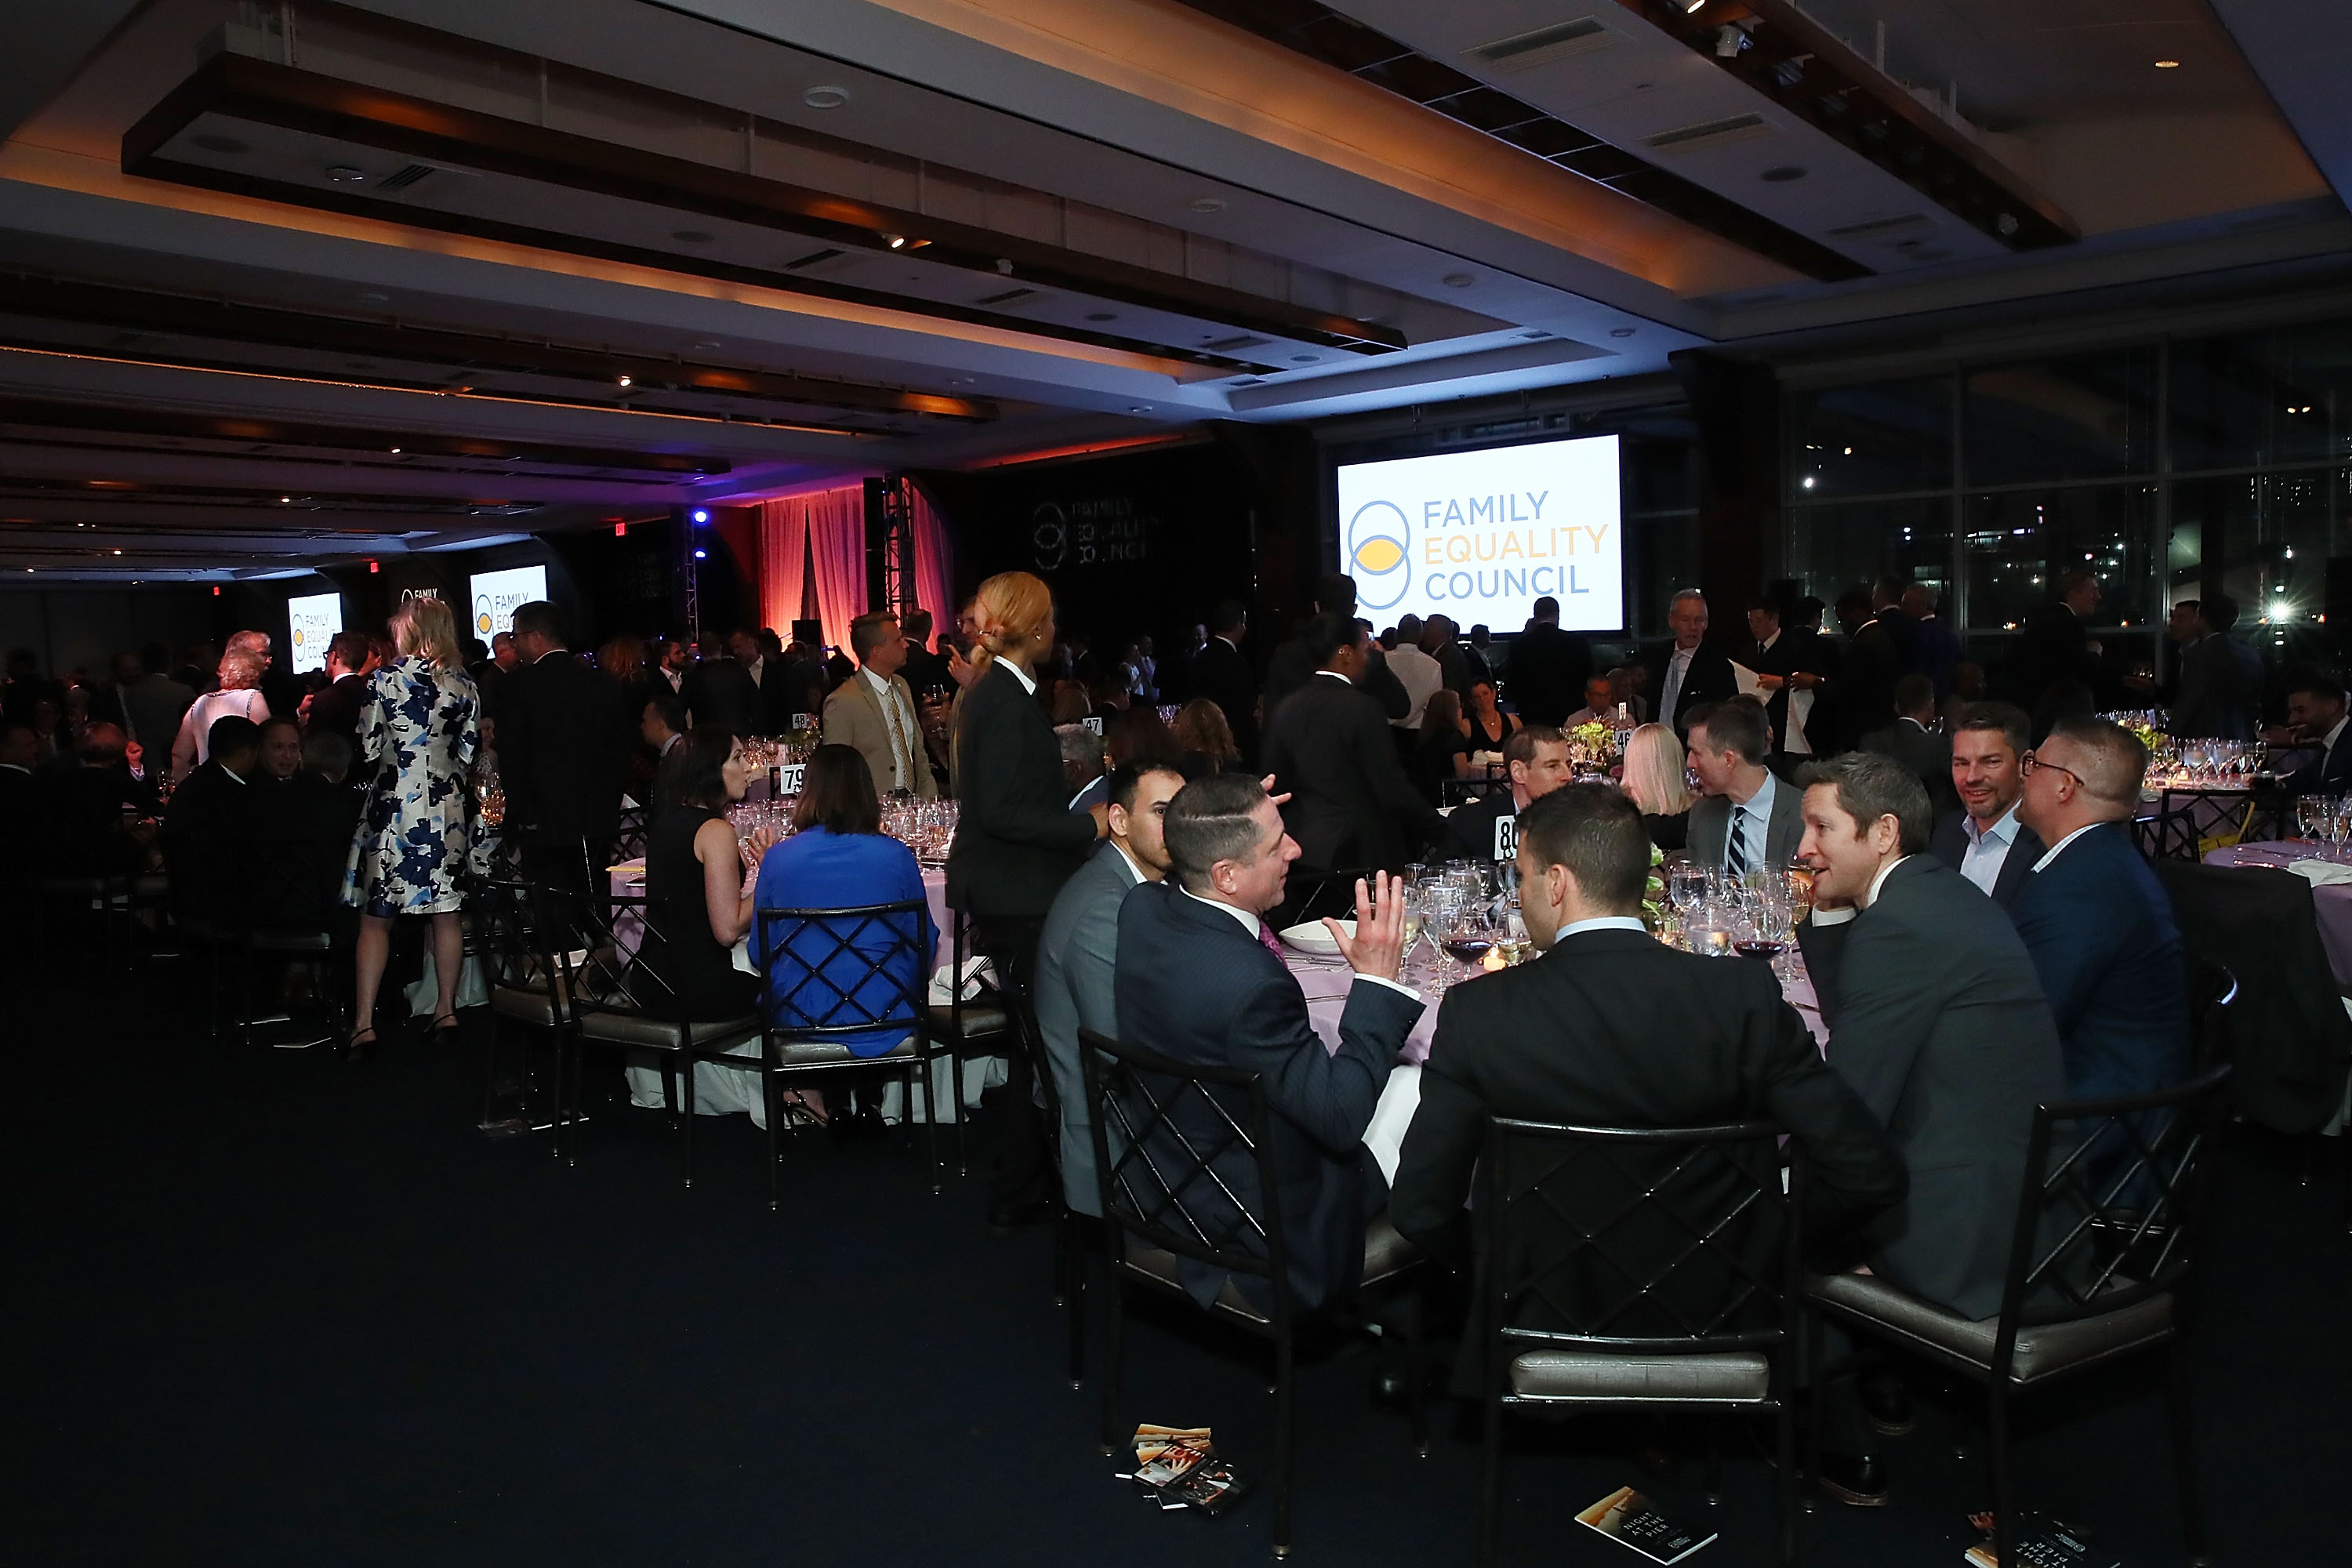 New Yorkers Fete Night At The Pier Gala With Entertainment And Moving Stories